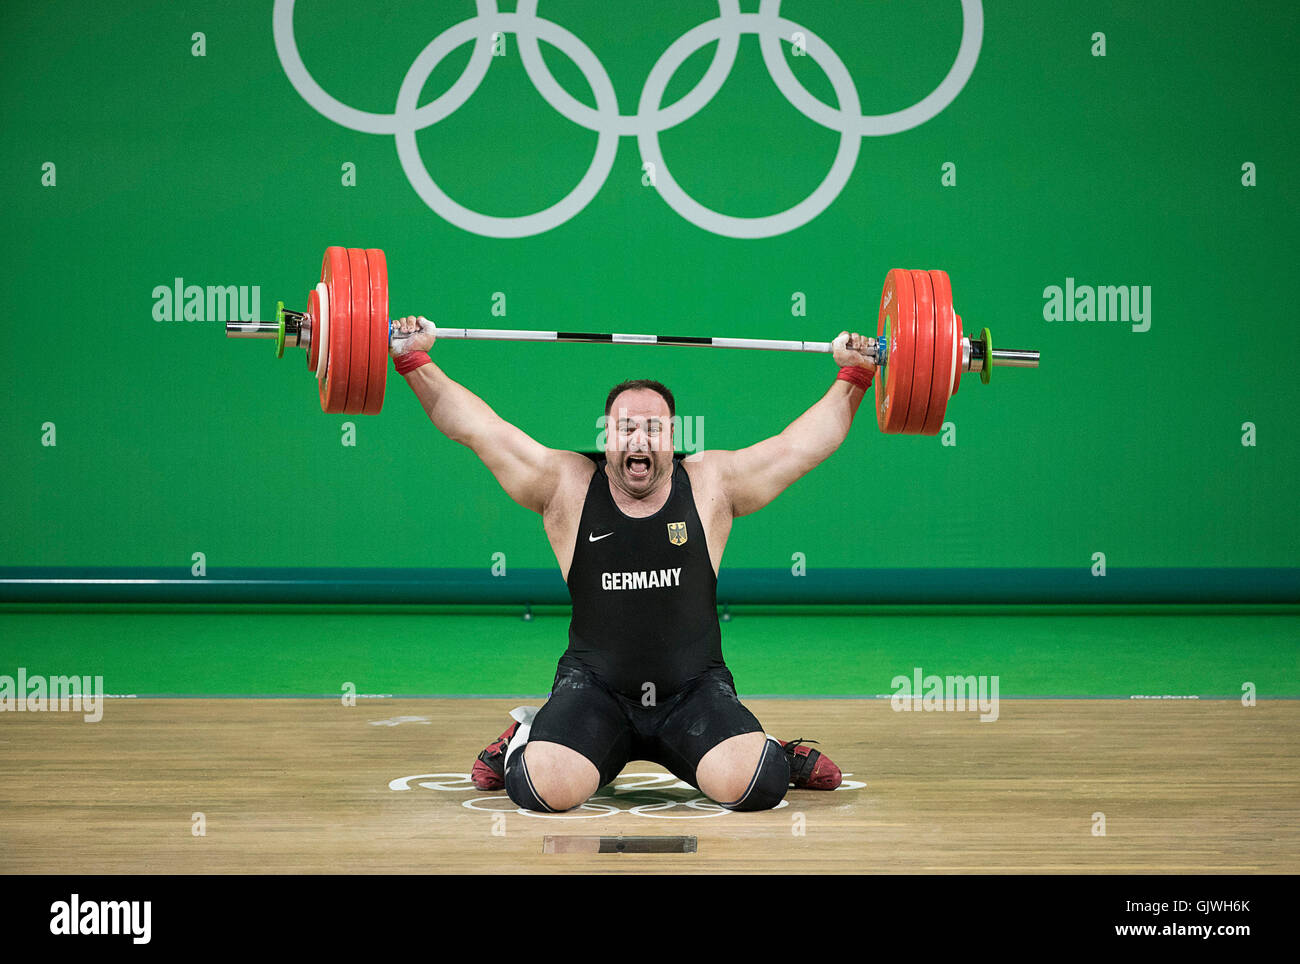 Rio de Janeiro, RJ, Brazil. 16th Aug, 2016. OLYMPICS WEIGHTLIFTING: Almir Pelagic (GER) misses his third lift in the Men's  105kg final at Riocentro during the 2016 Rio Summer Olympics games. © Paul Kitagaki Jr./ZUMA Wire/Alamy Live News Stock Photo